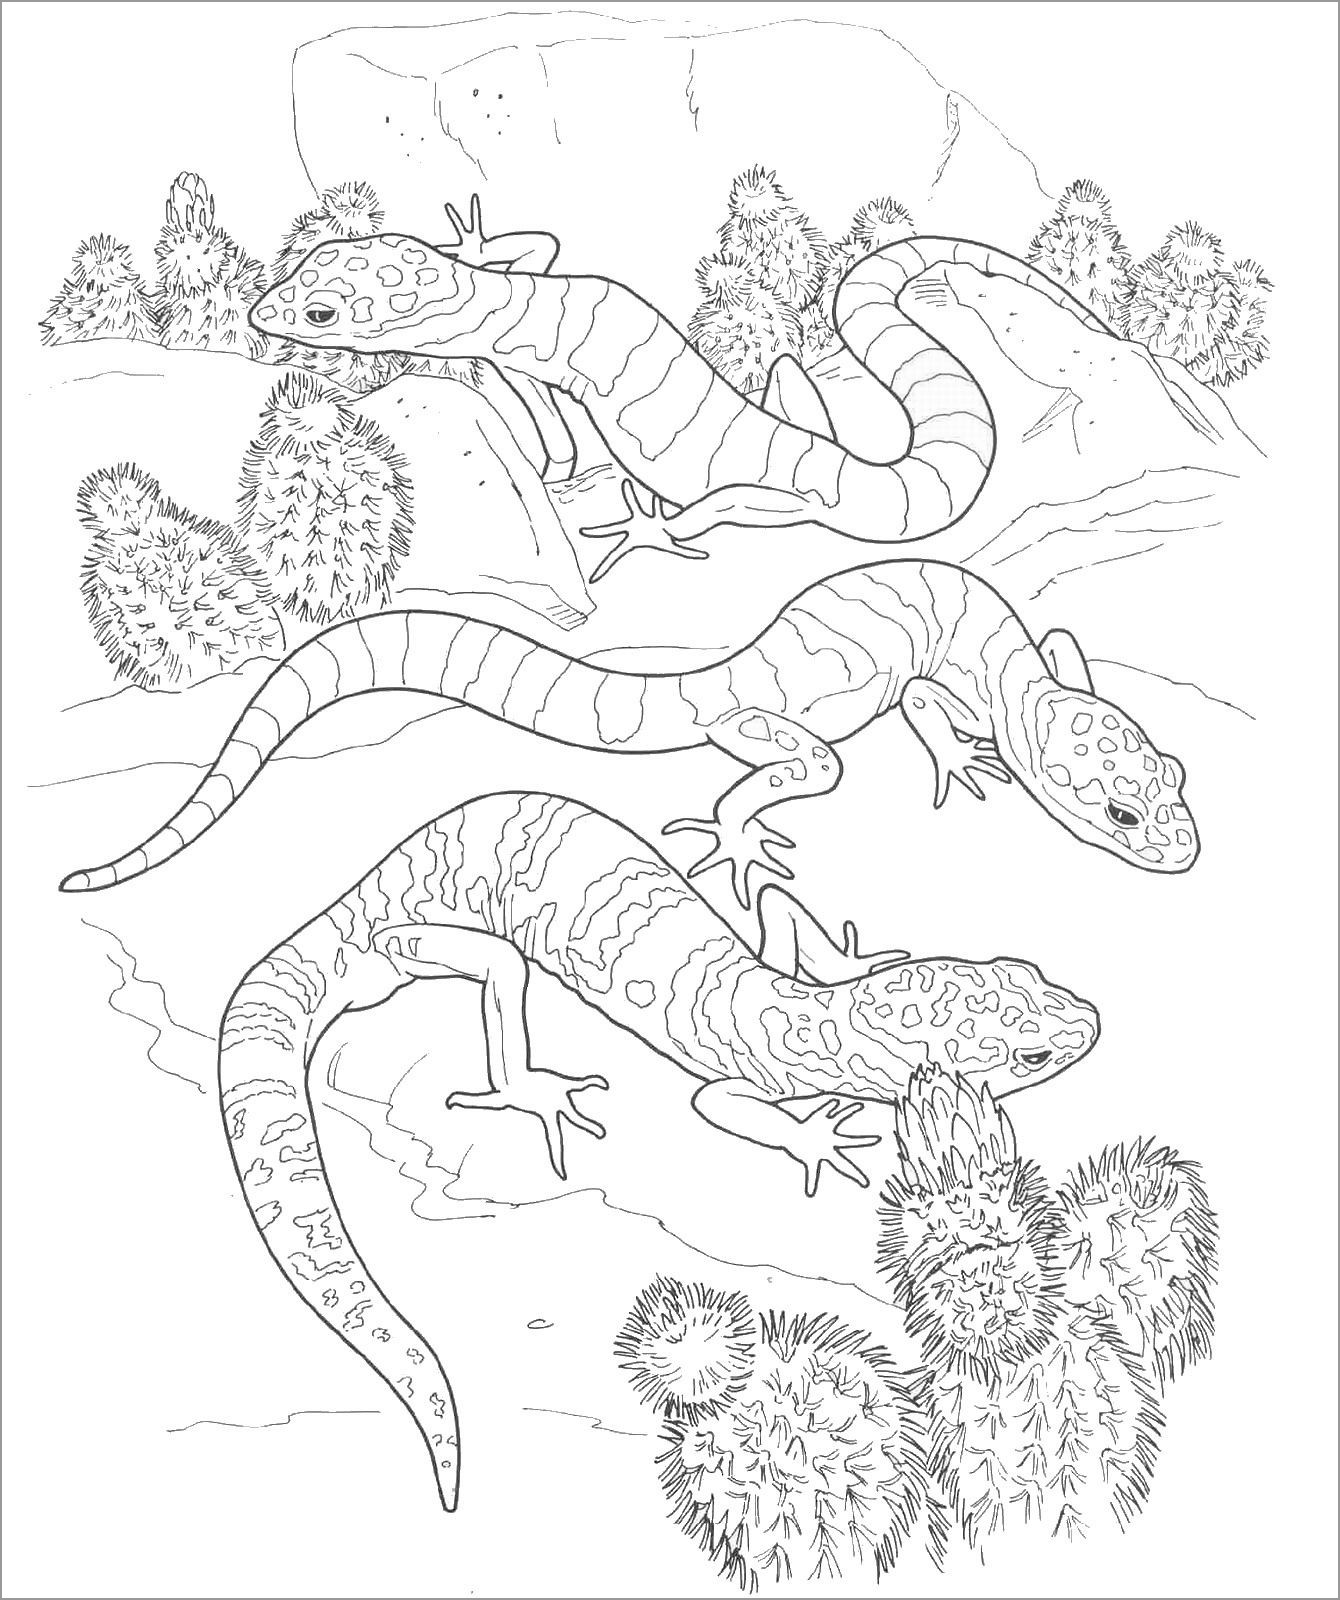 Desert Animal Lizard Coloring Page for Adult